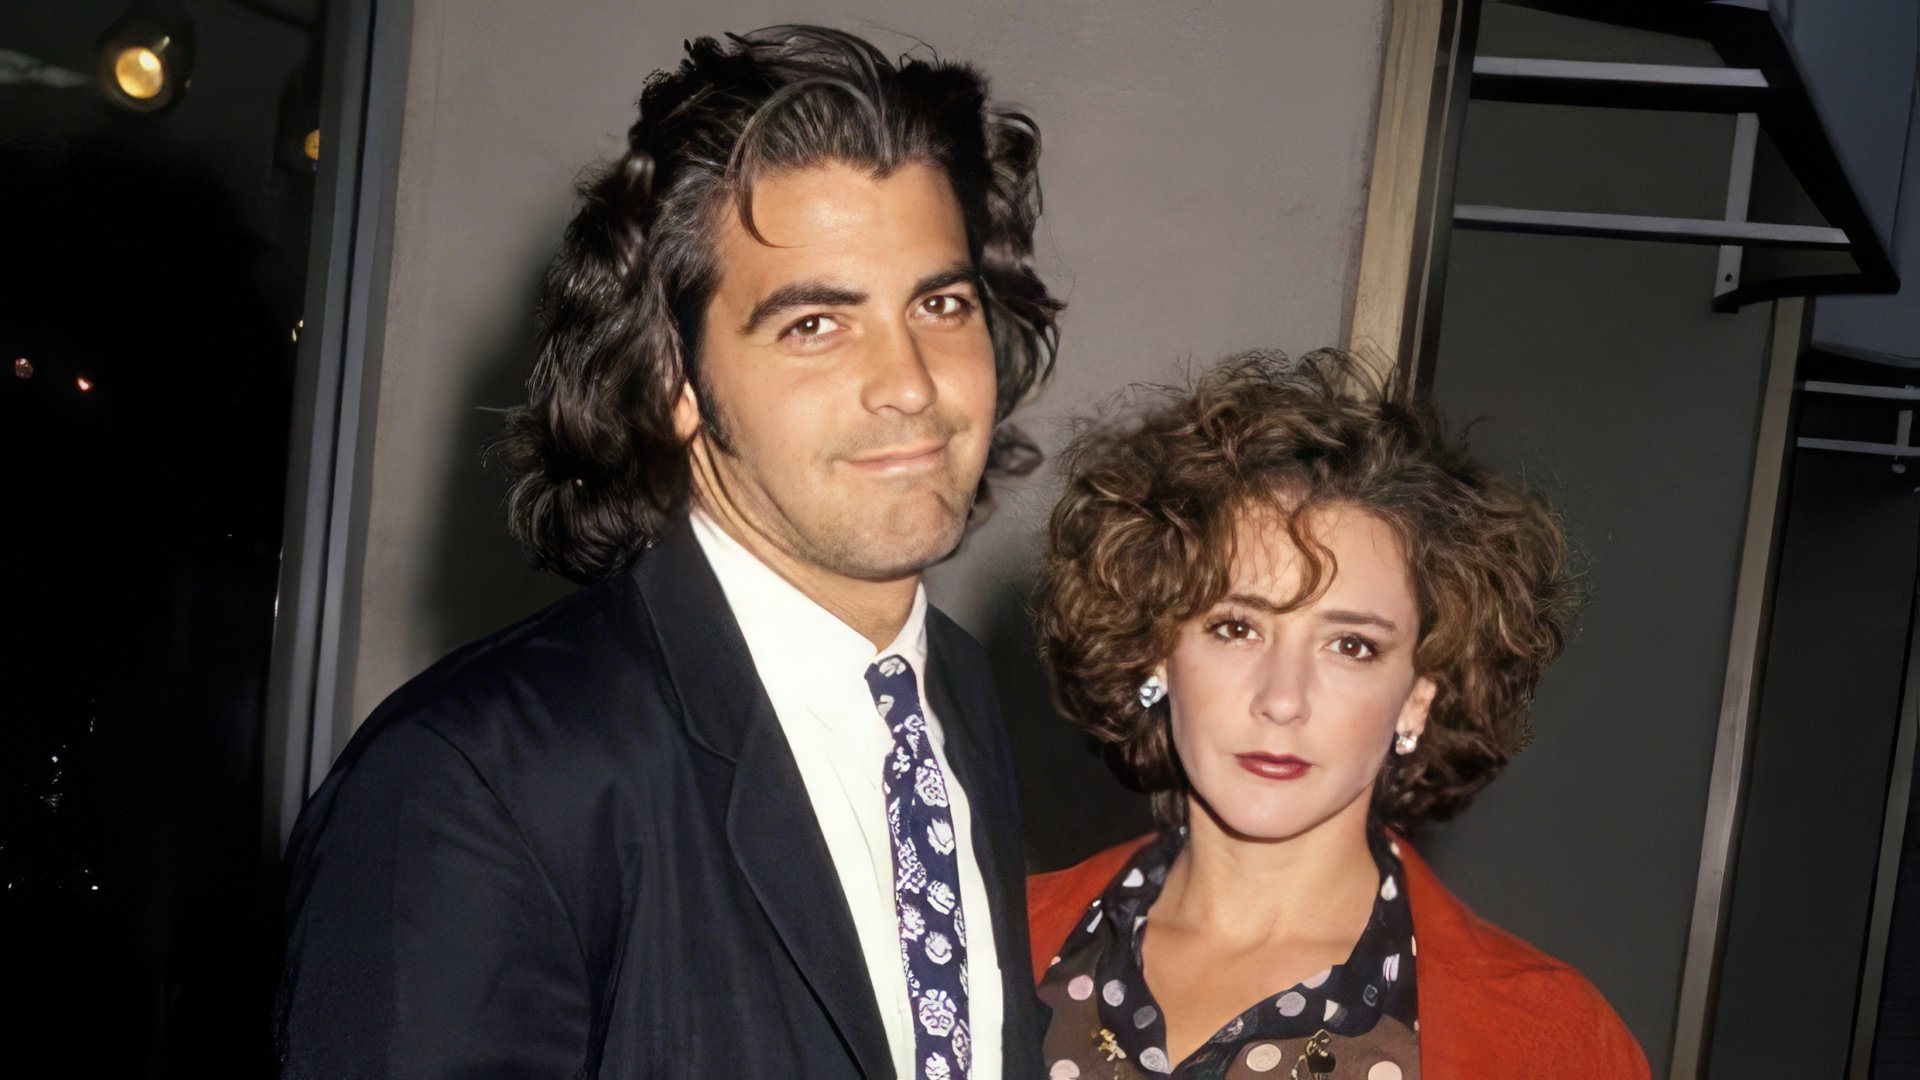 George Clooney and his wife Talia Balsam